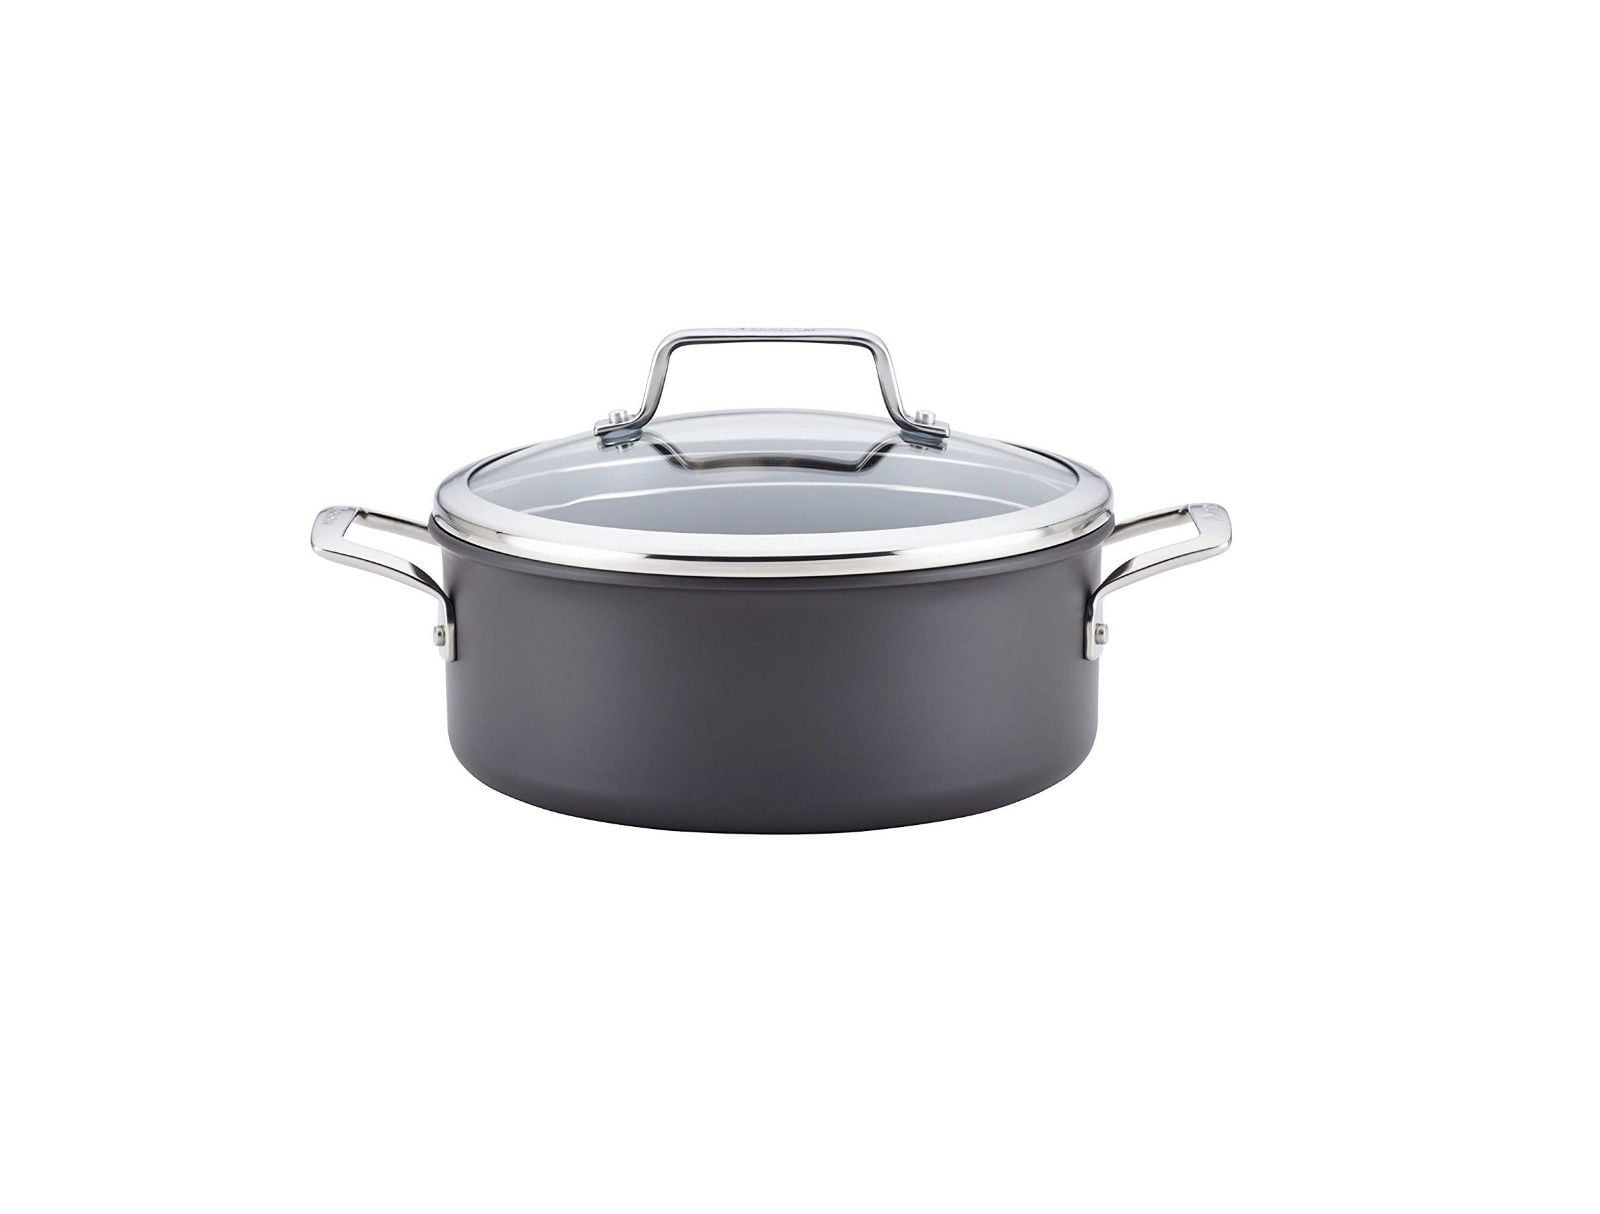 5 QUART GRAY NEW ANOLON AUTHORITY HARD-ANODIZED NONSTICK COVERED DUTCH OVEN 